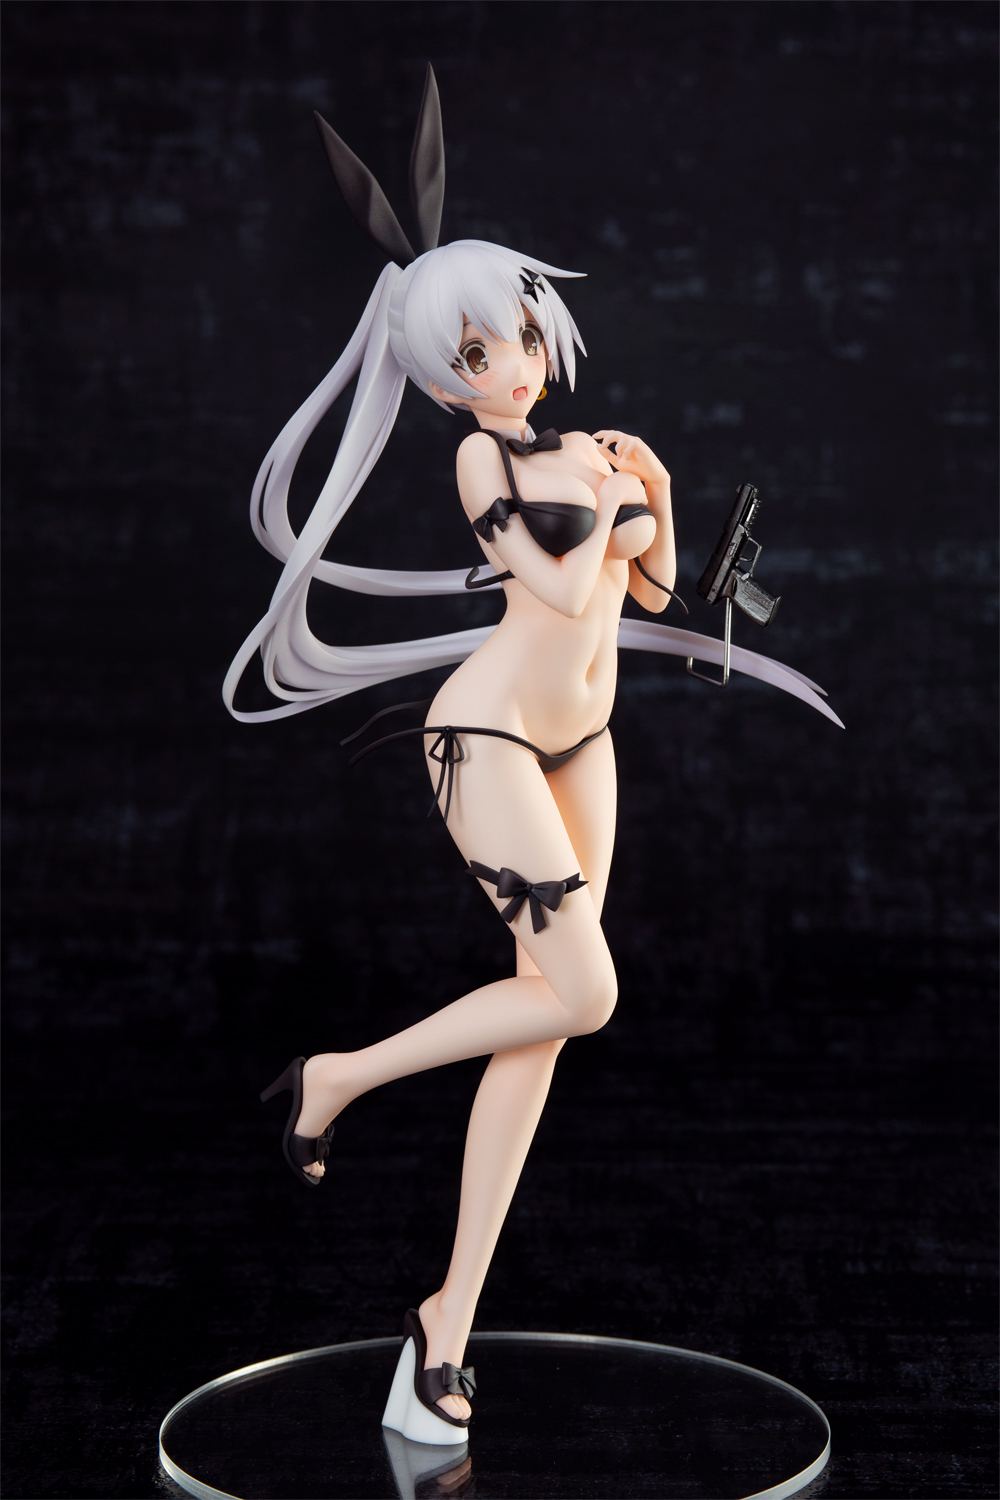 Girls' Frontline 1/7 Scale Pre-Painted Figure: Five-seveN Swimsuit Damaged Ver. (Cruise Queen) Phalaeno